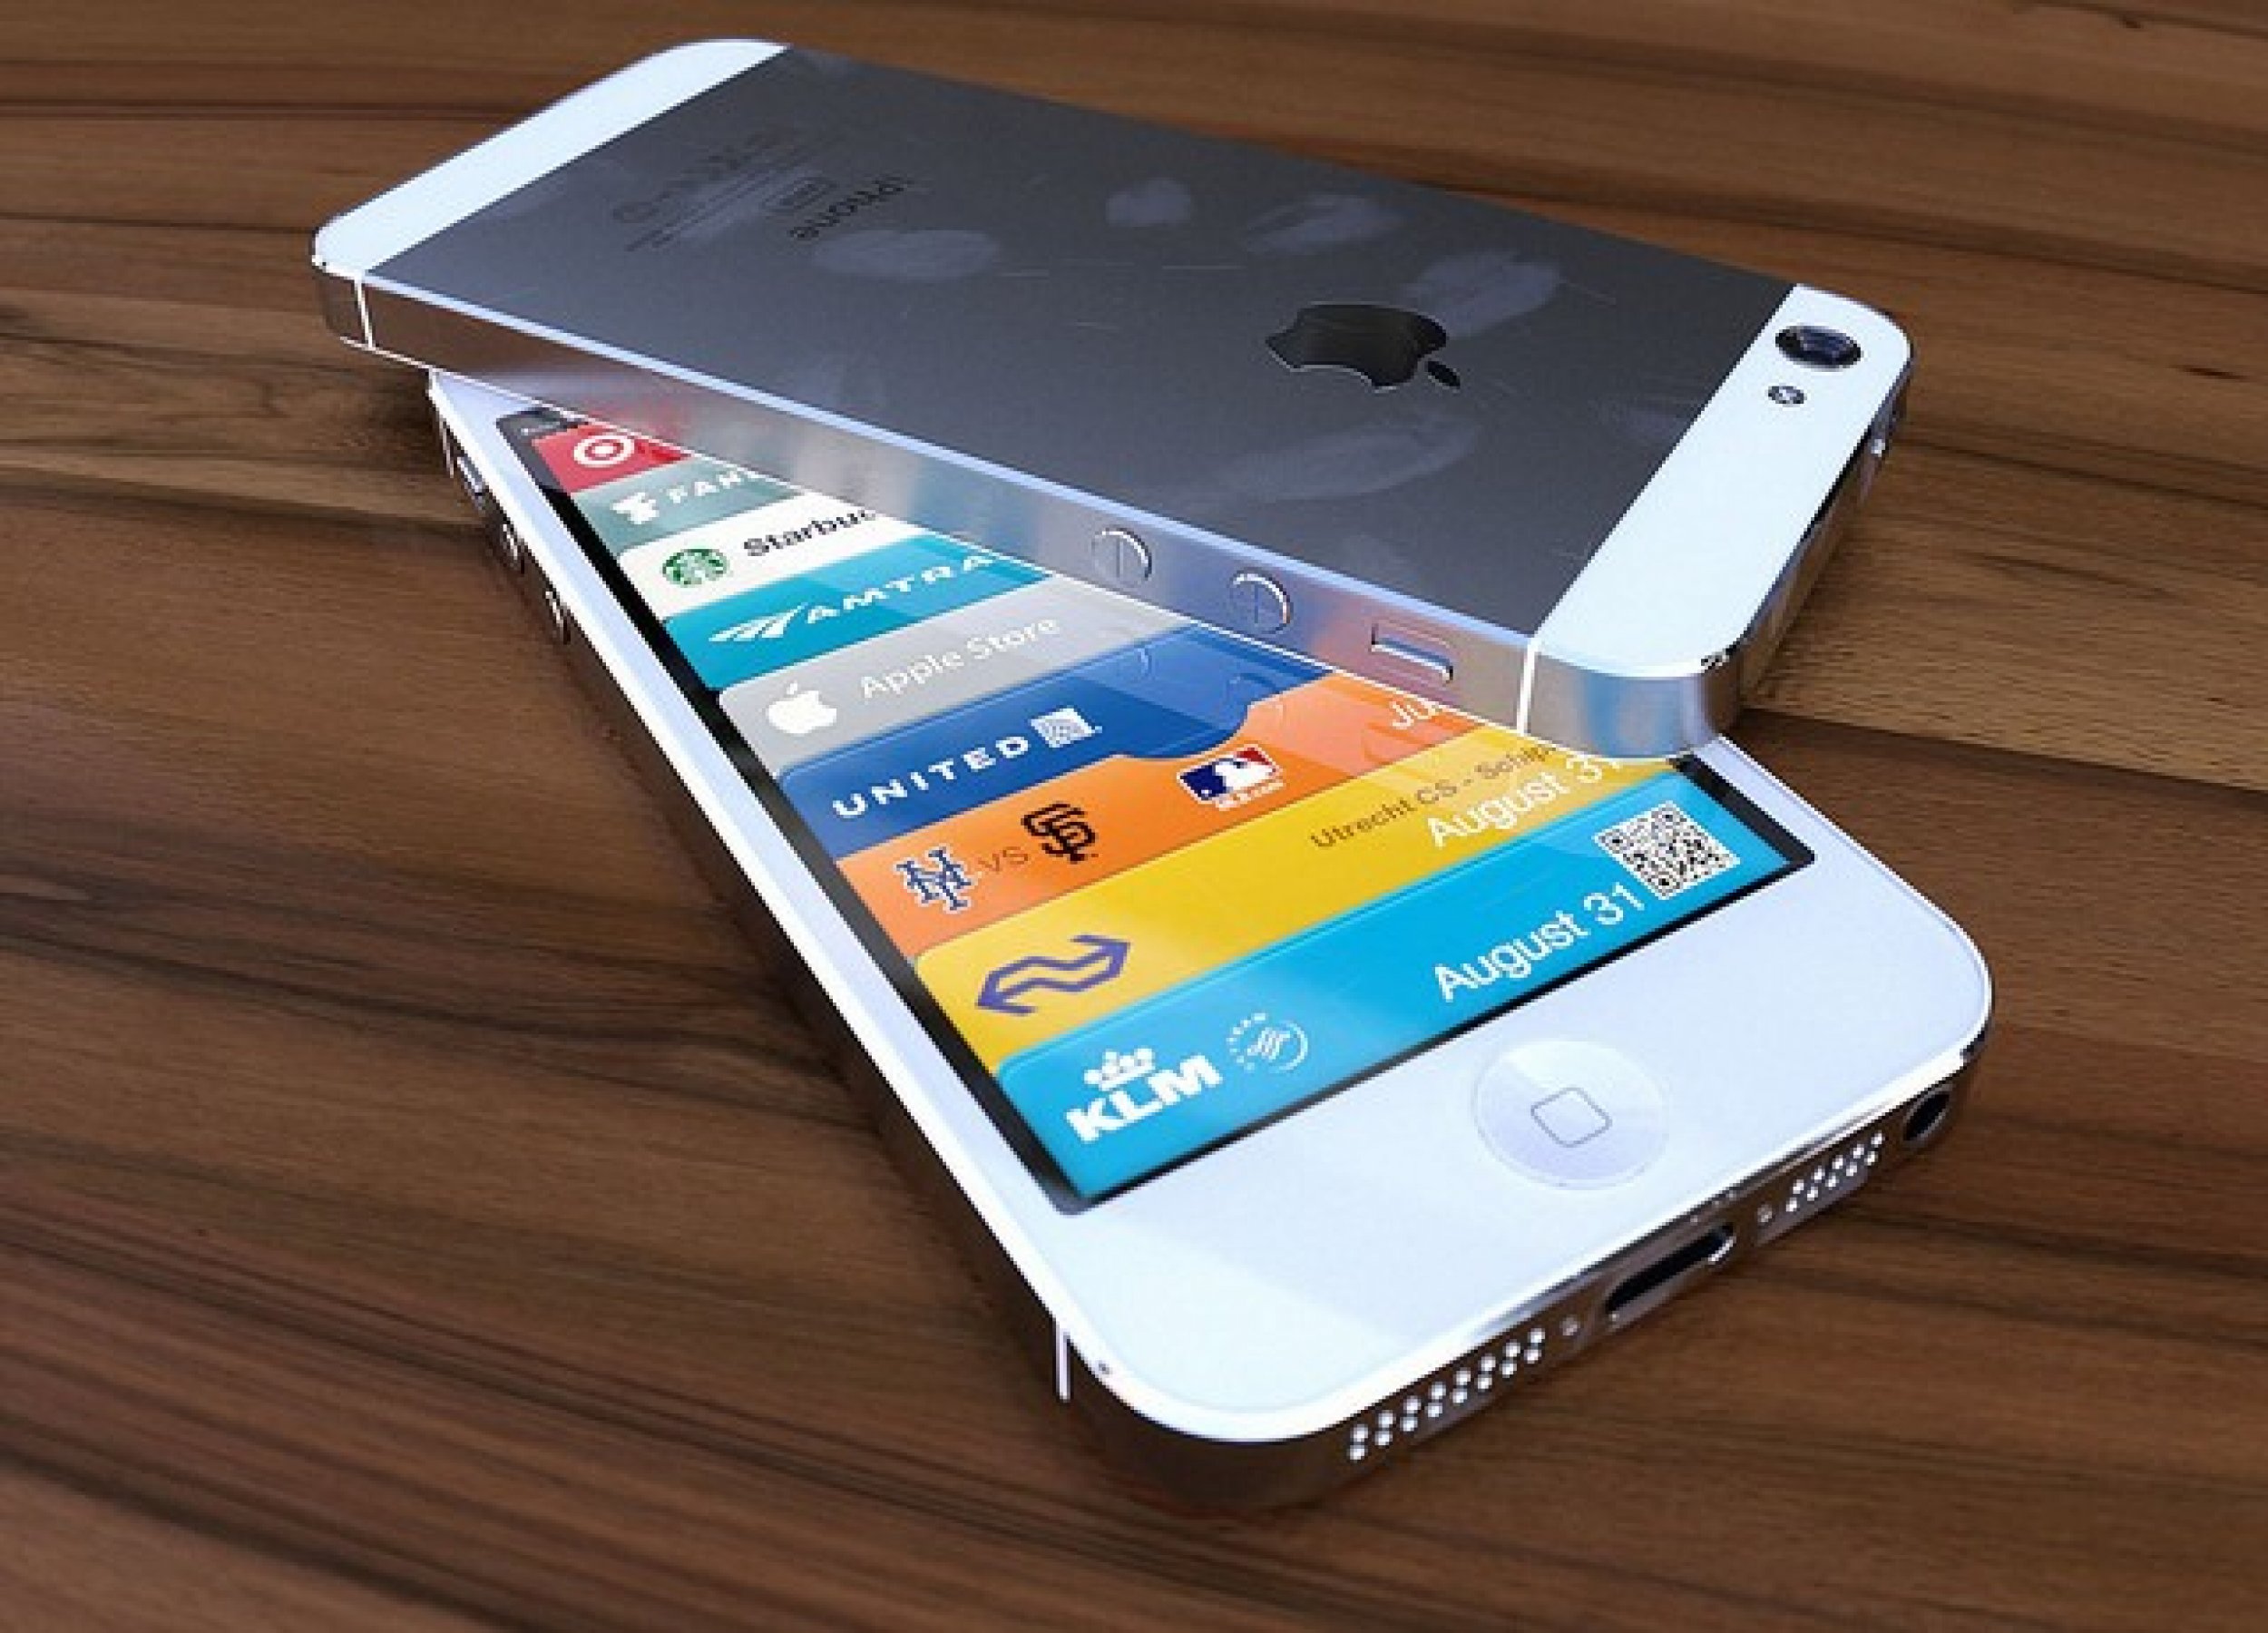 Apple Iphone 5 Release Date Set For Sept 21 Device To Debut Along With Ipad Mini On Sept 12